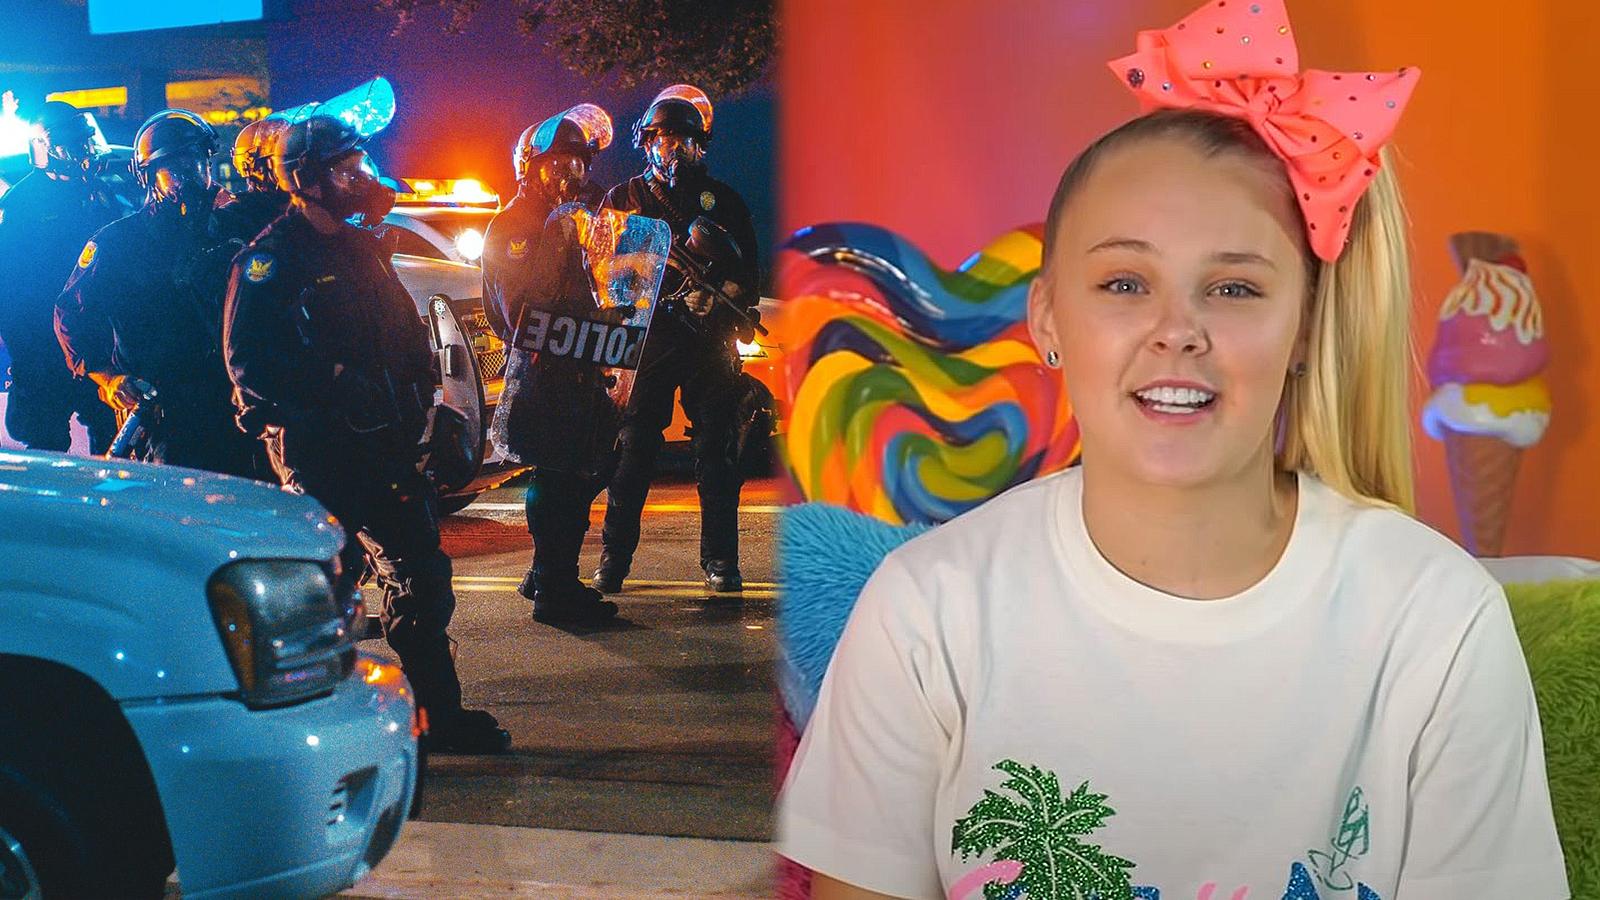 JoJo Siwa swatted after coming out